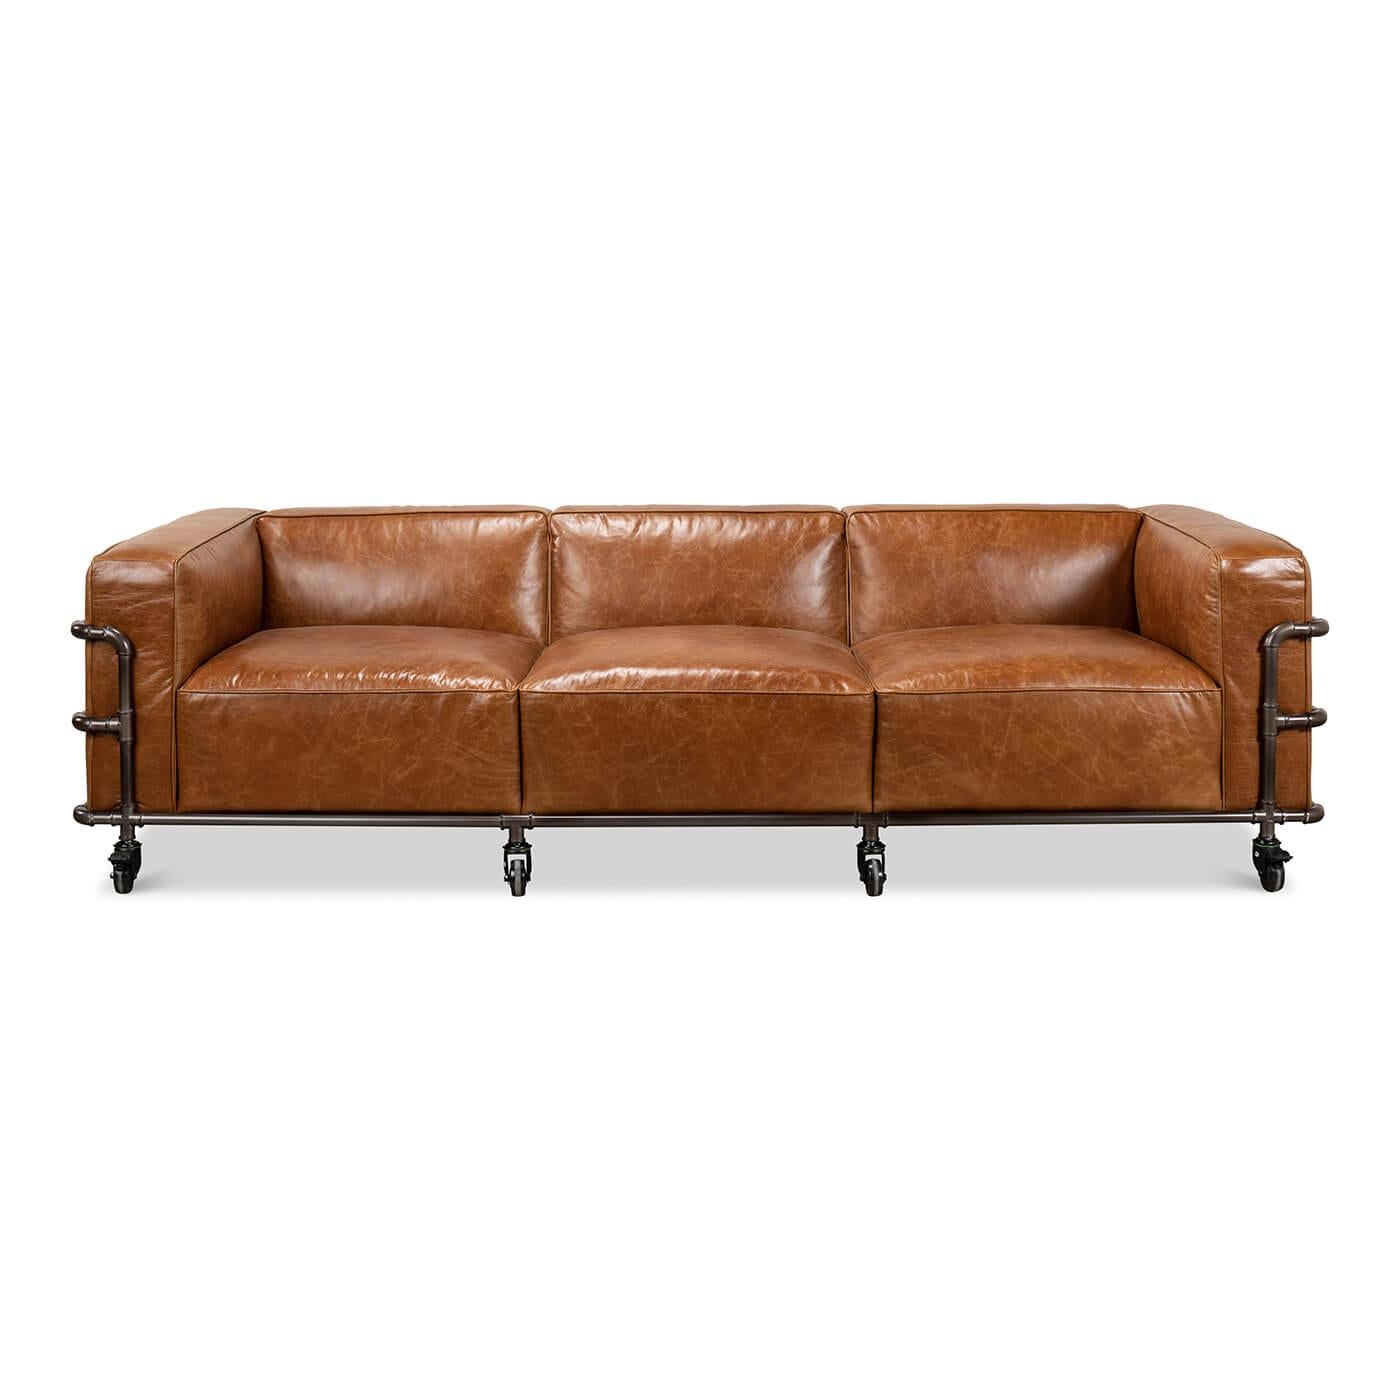 British Industrial Leather Sofa For Sale at 1stDibs